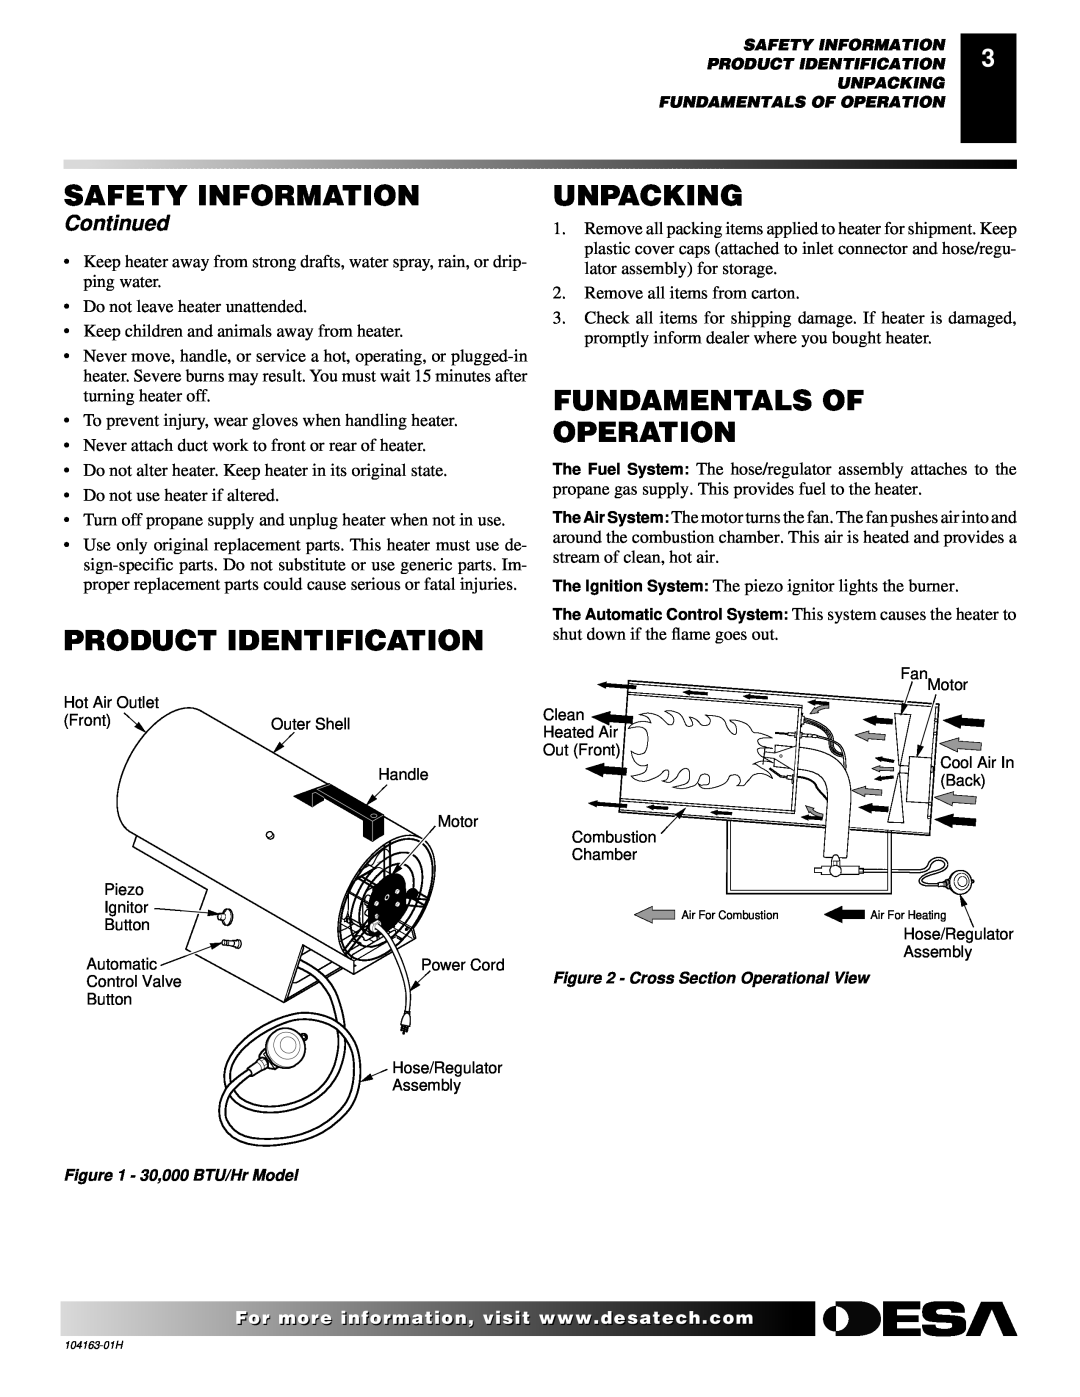 Desa REM30LP owner manual Product Identification, Unpacking, Fundamentals Of Operation, Continued, Safety Information 